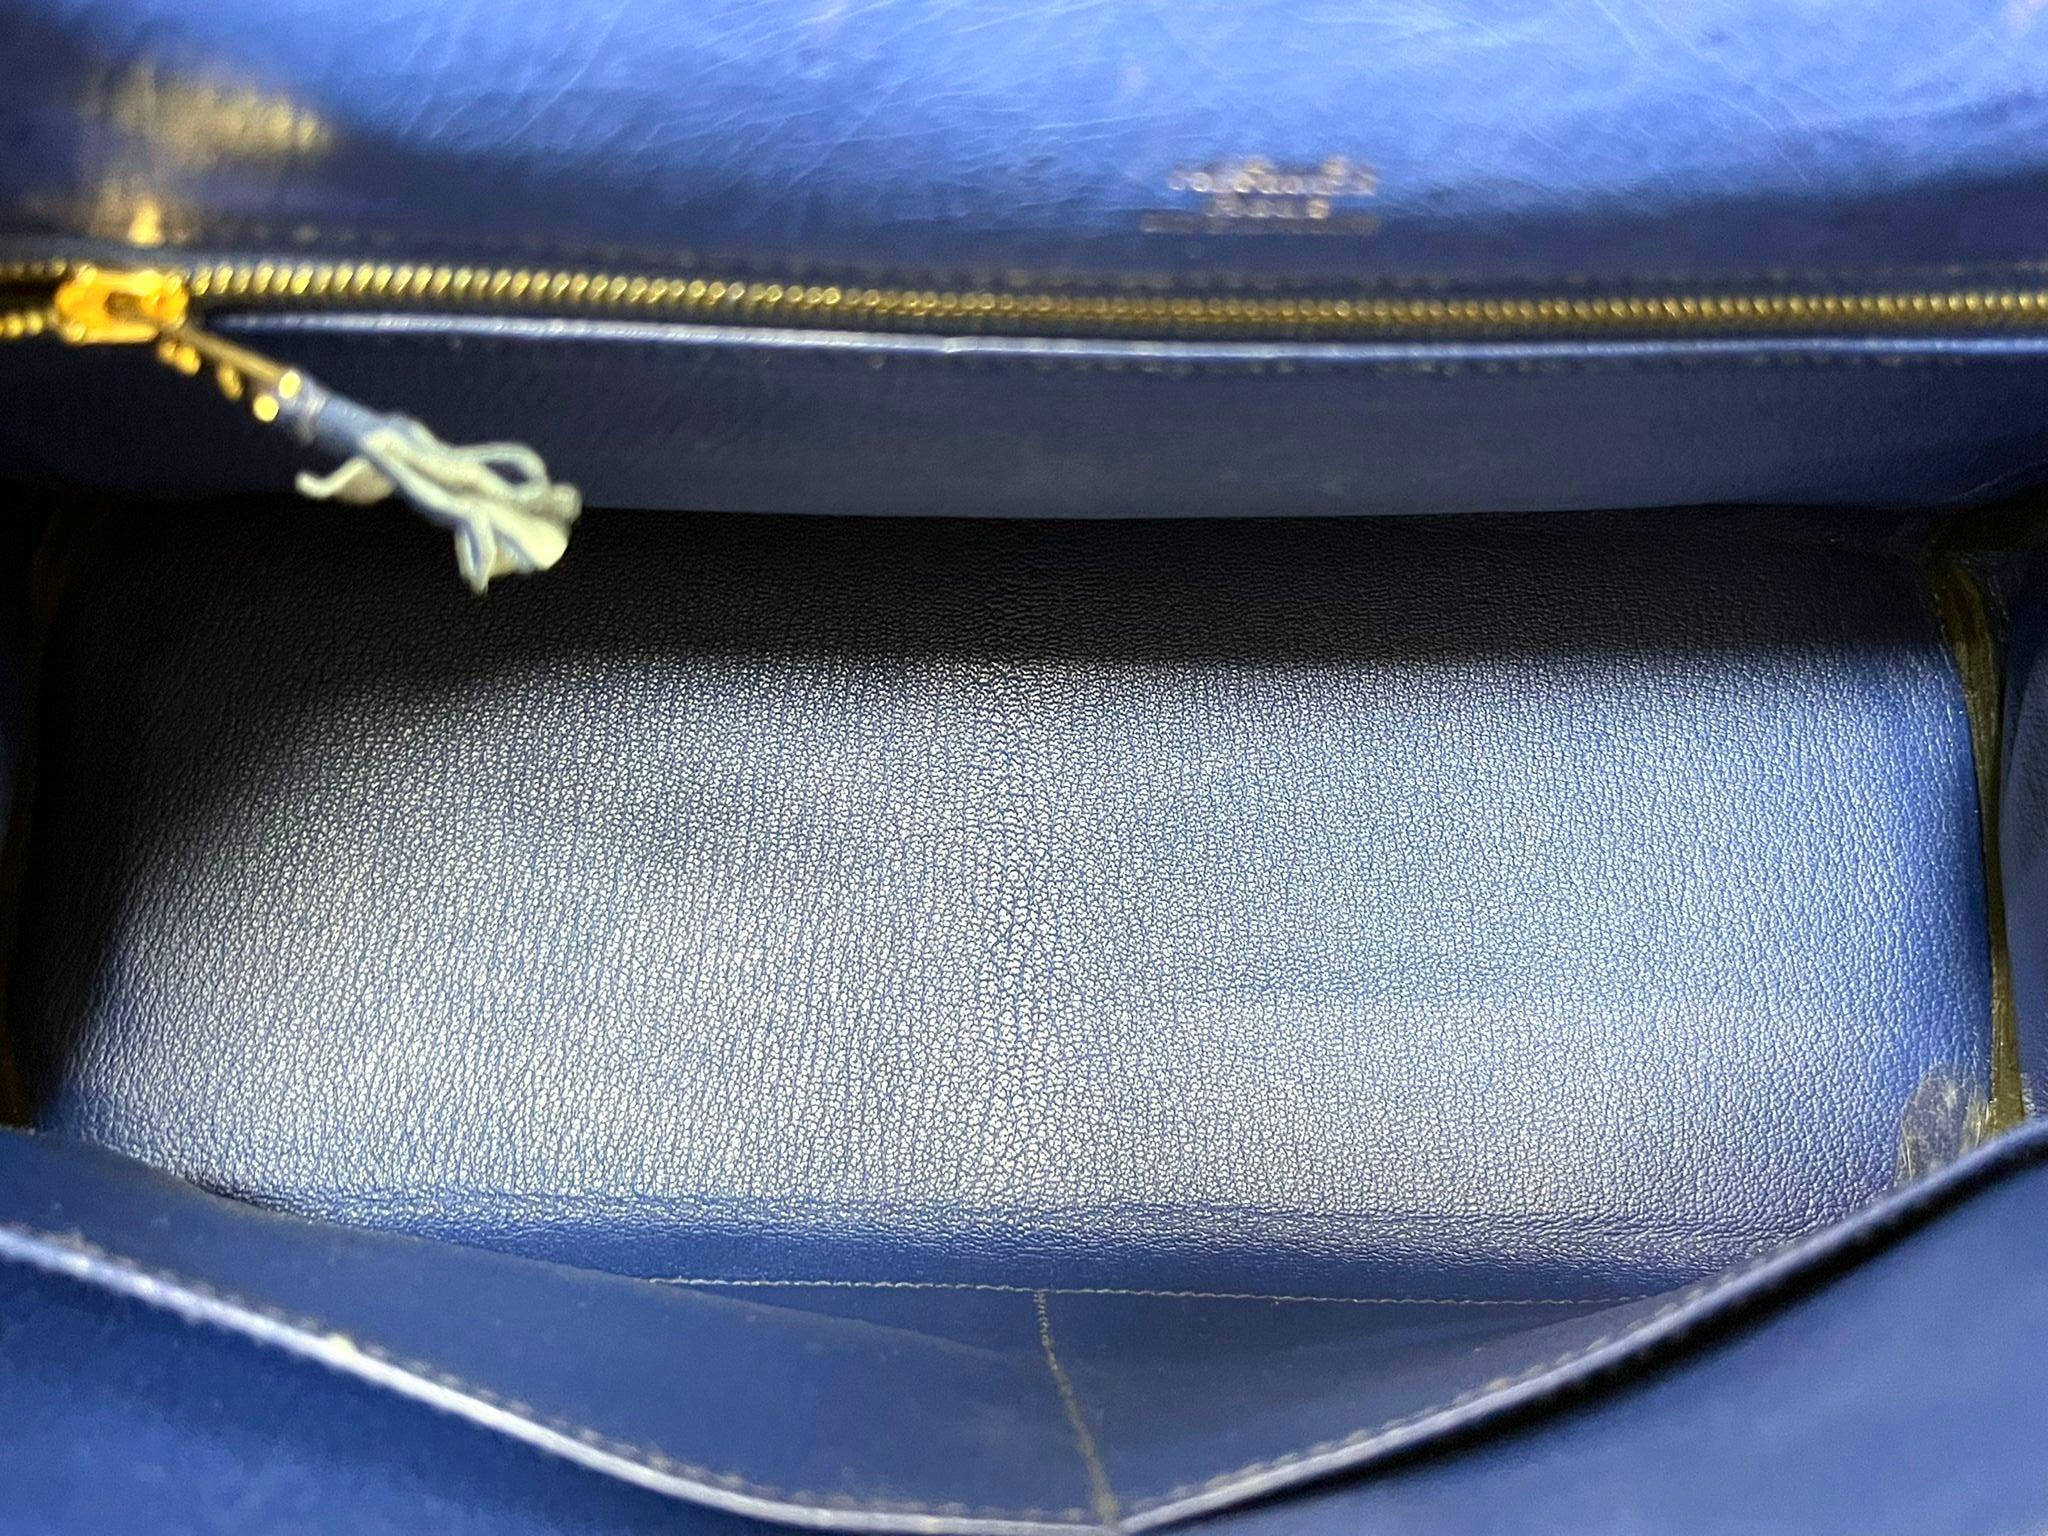 Hermes Kelly Ltd Edition Ghillies Bag In Ostrich Skin For Sale 4